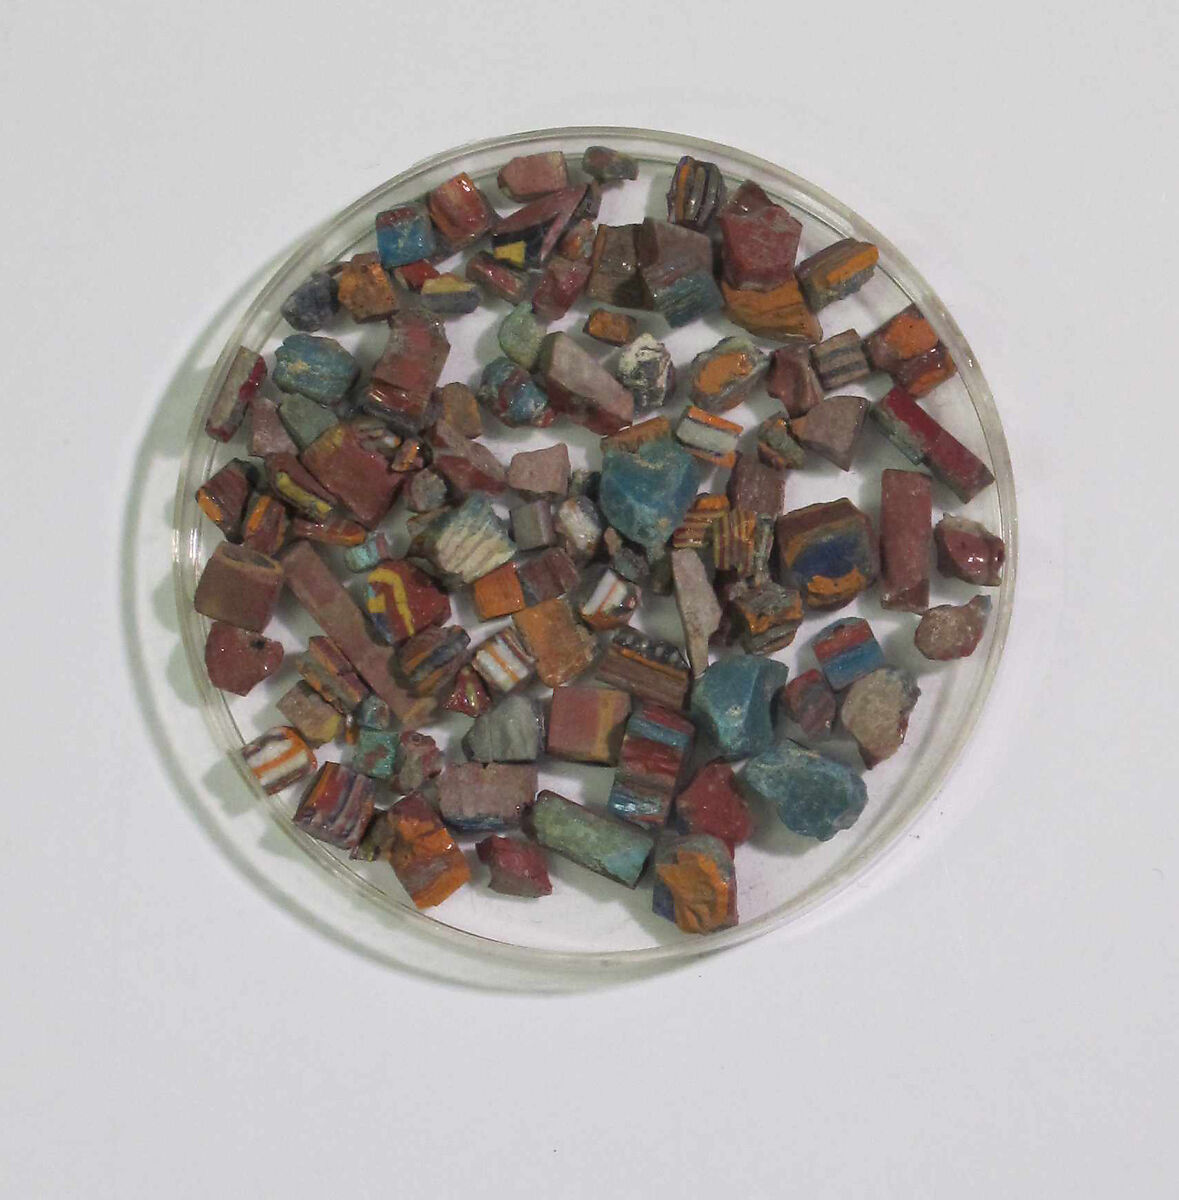 Inlays from shrine: patterned fragments, Glass 